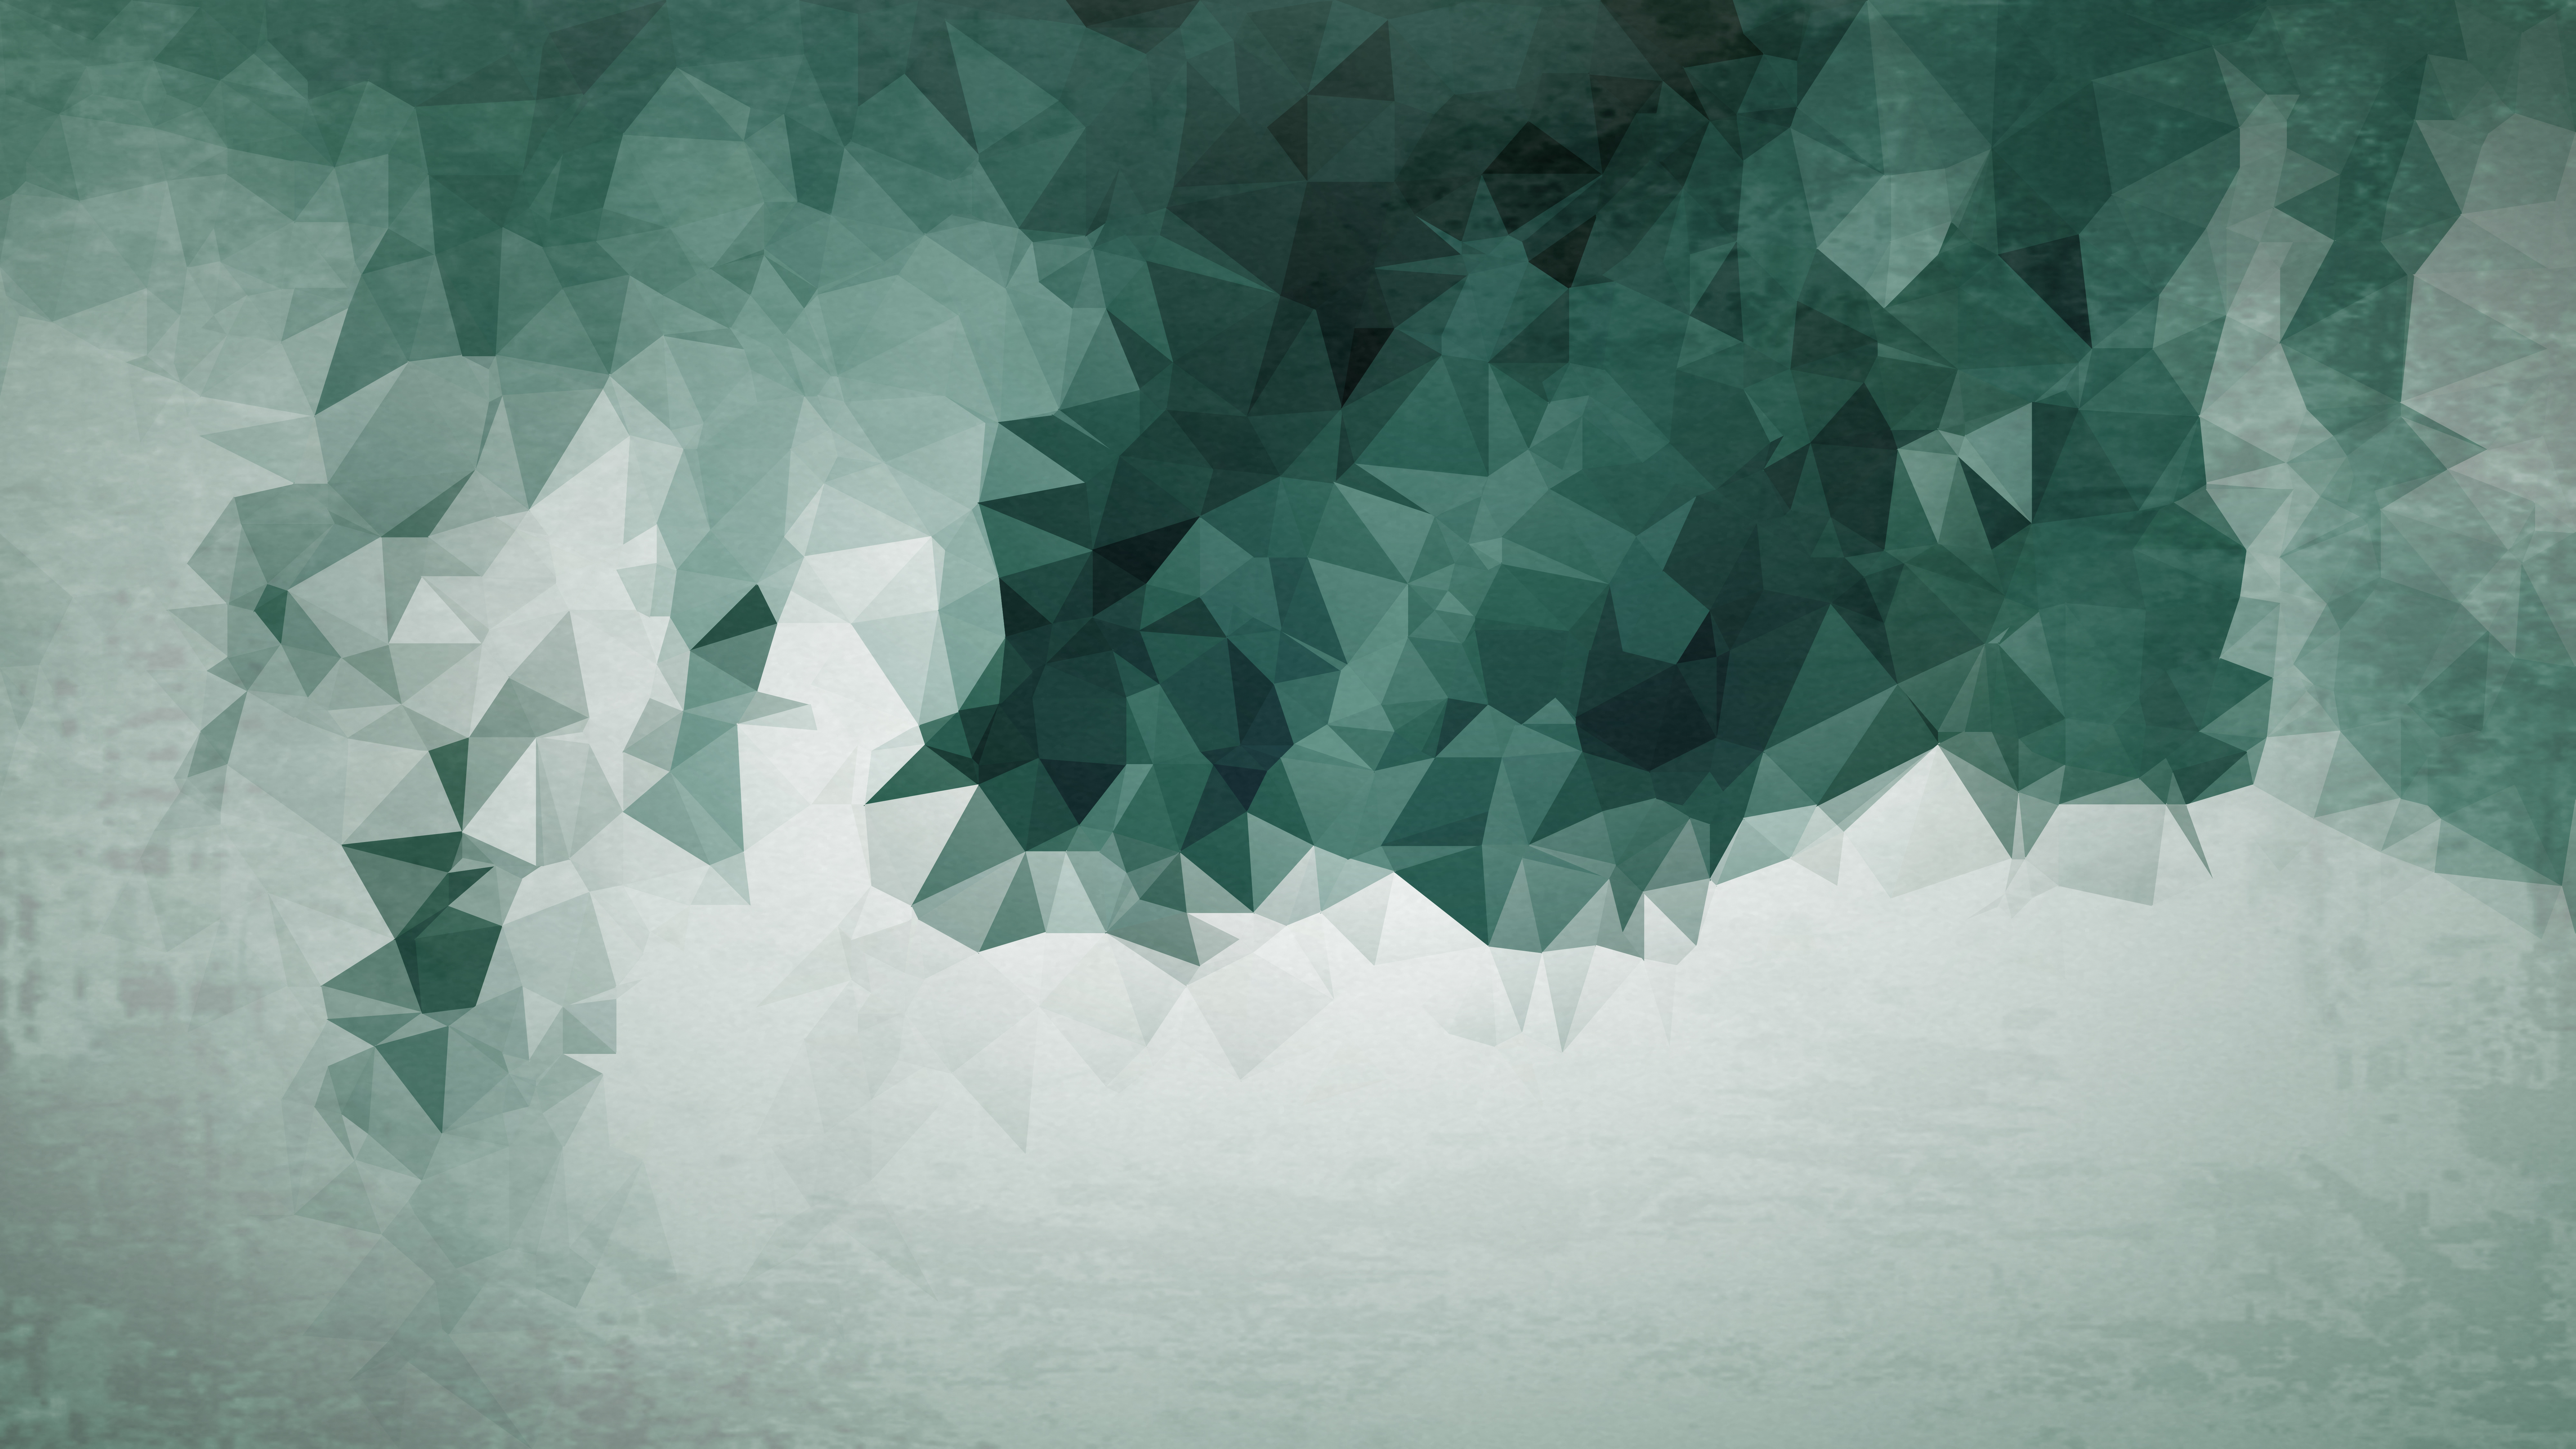 Free Green and Grey Grunge Texture Background Image